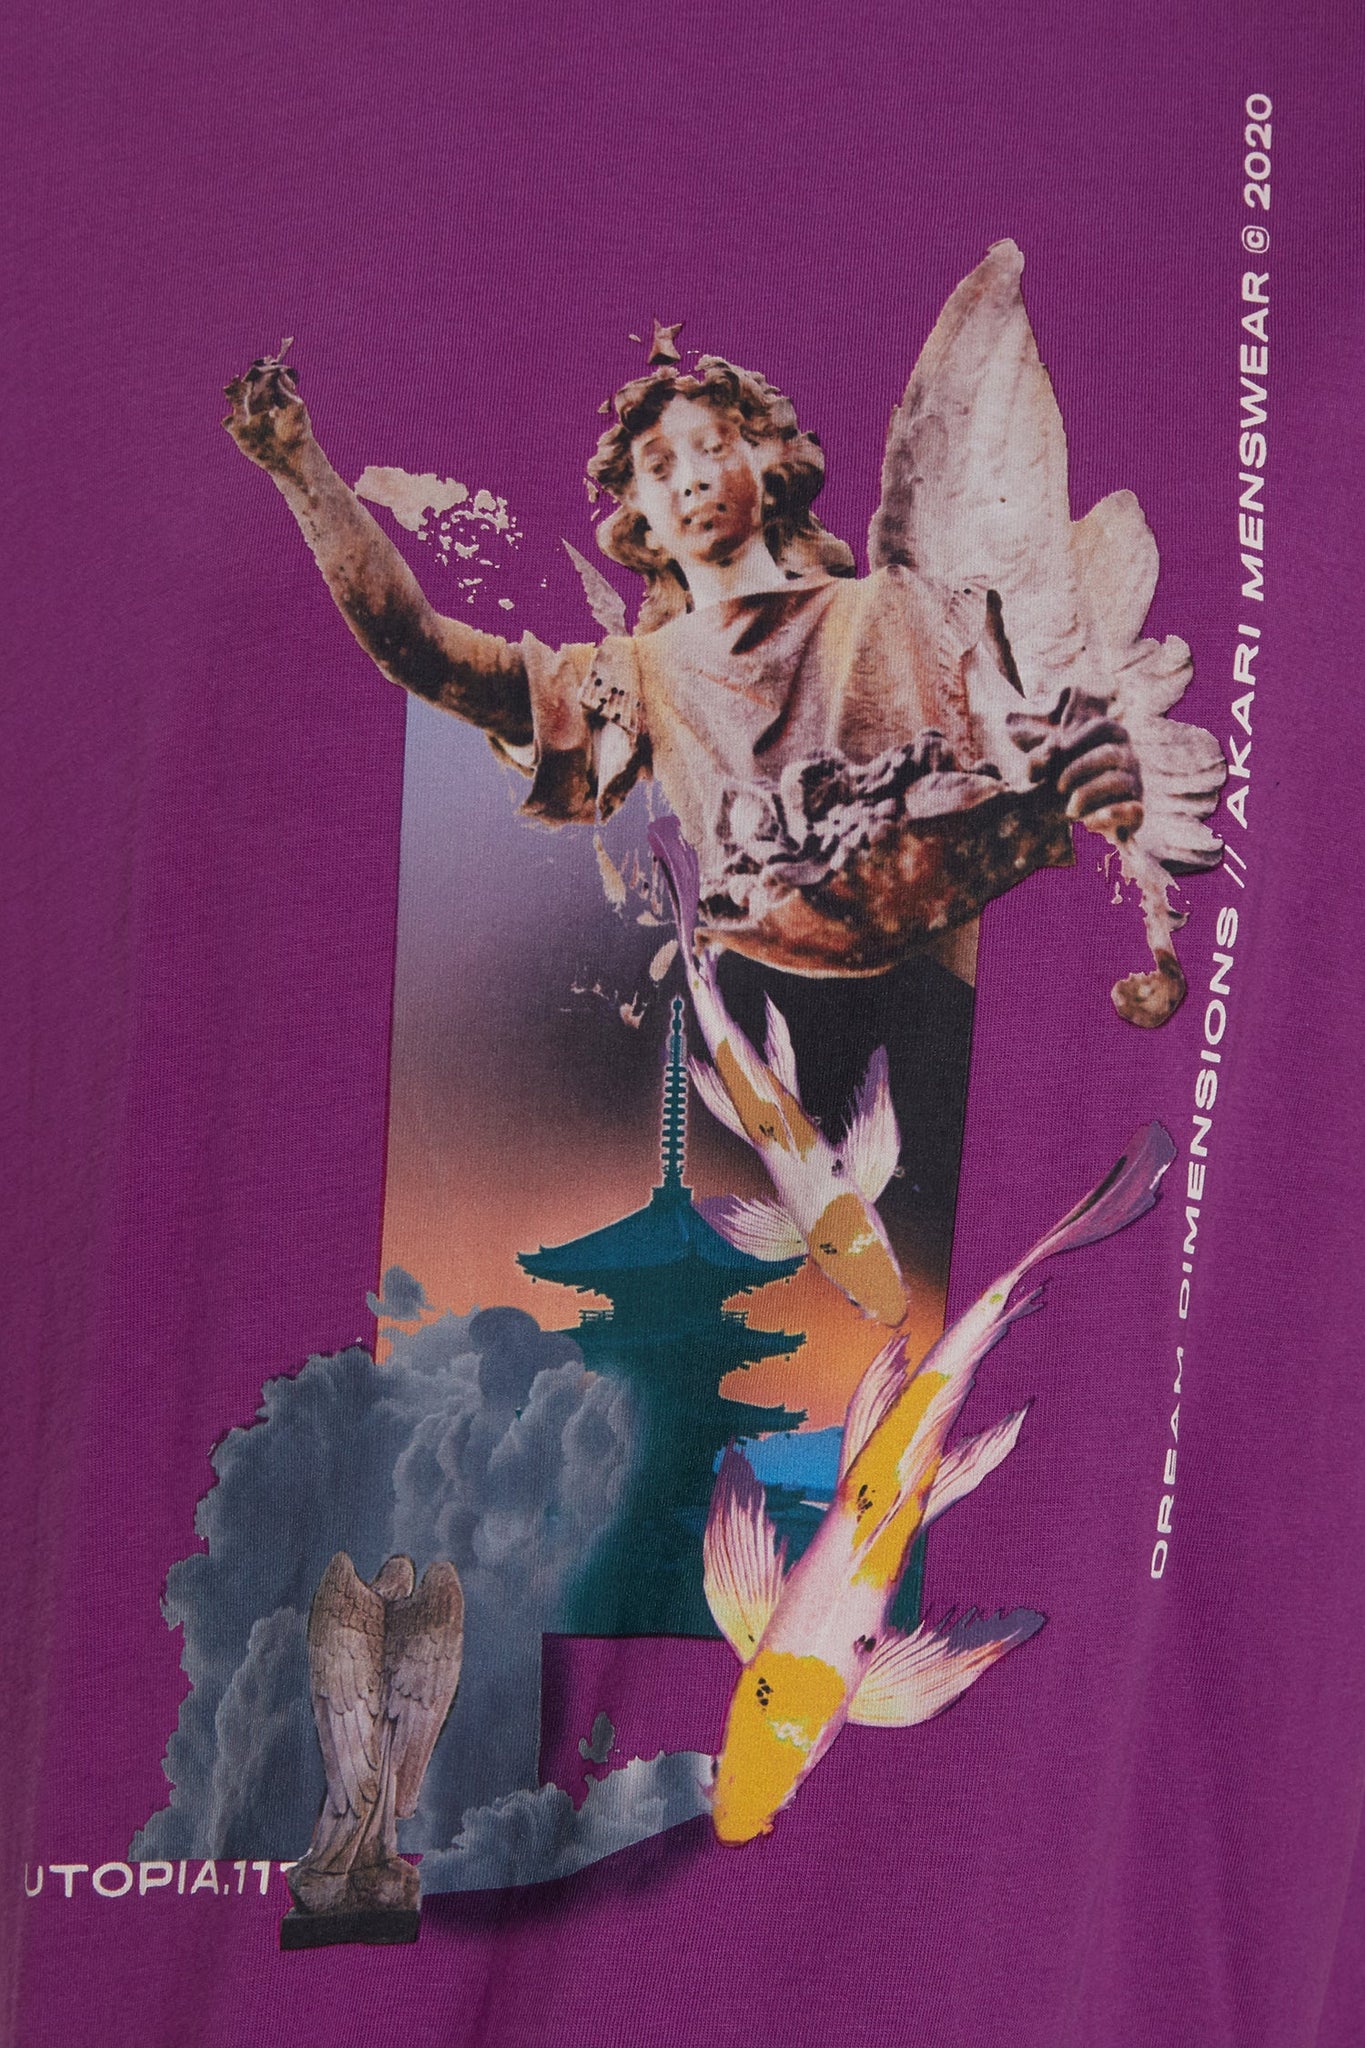 UTOPIA DIMENSIONS COLLAGE GRAPHIC T-SHIRT